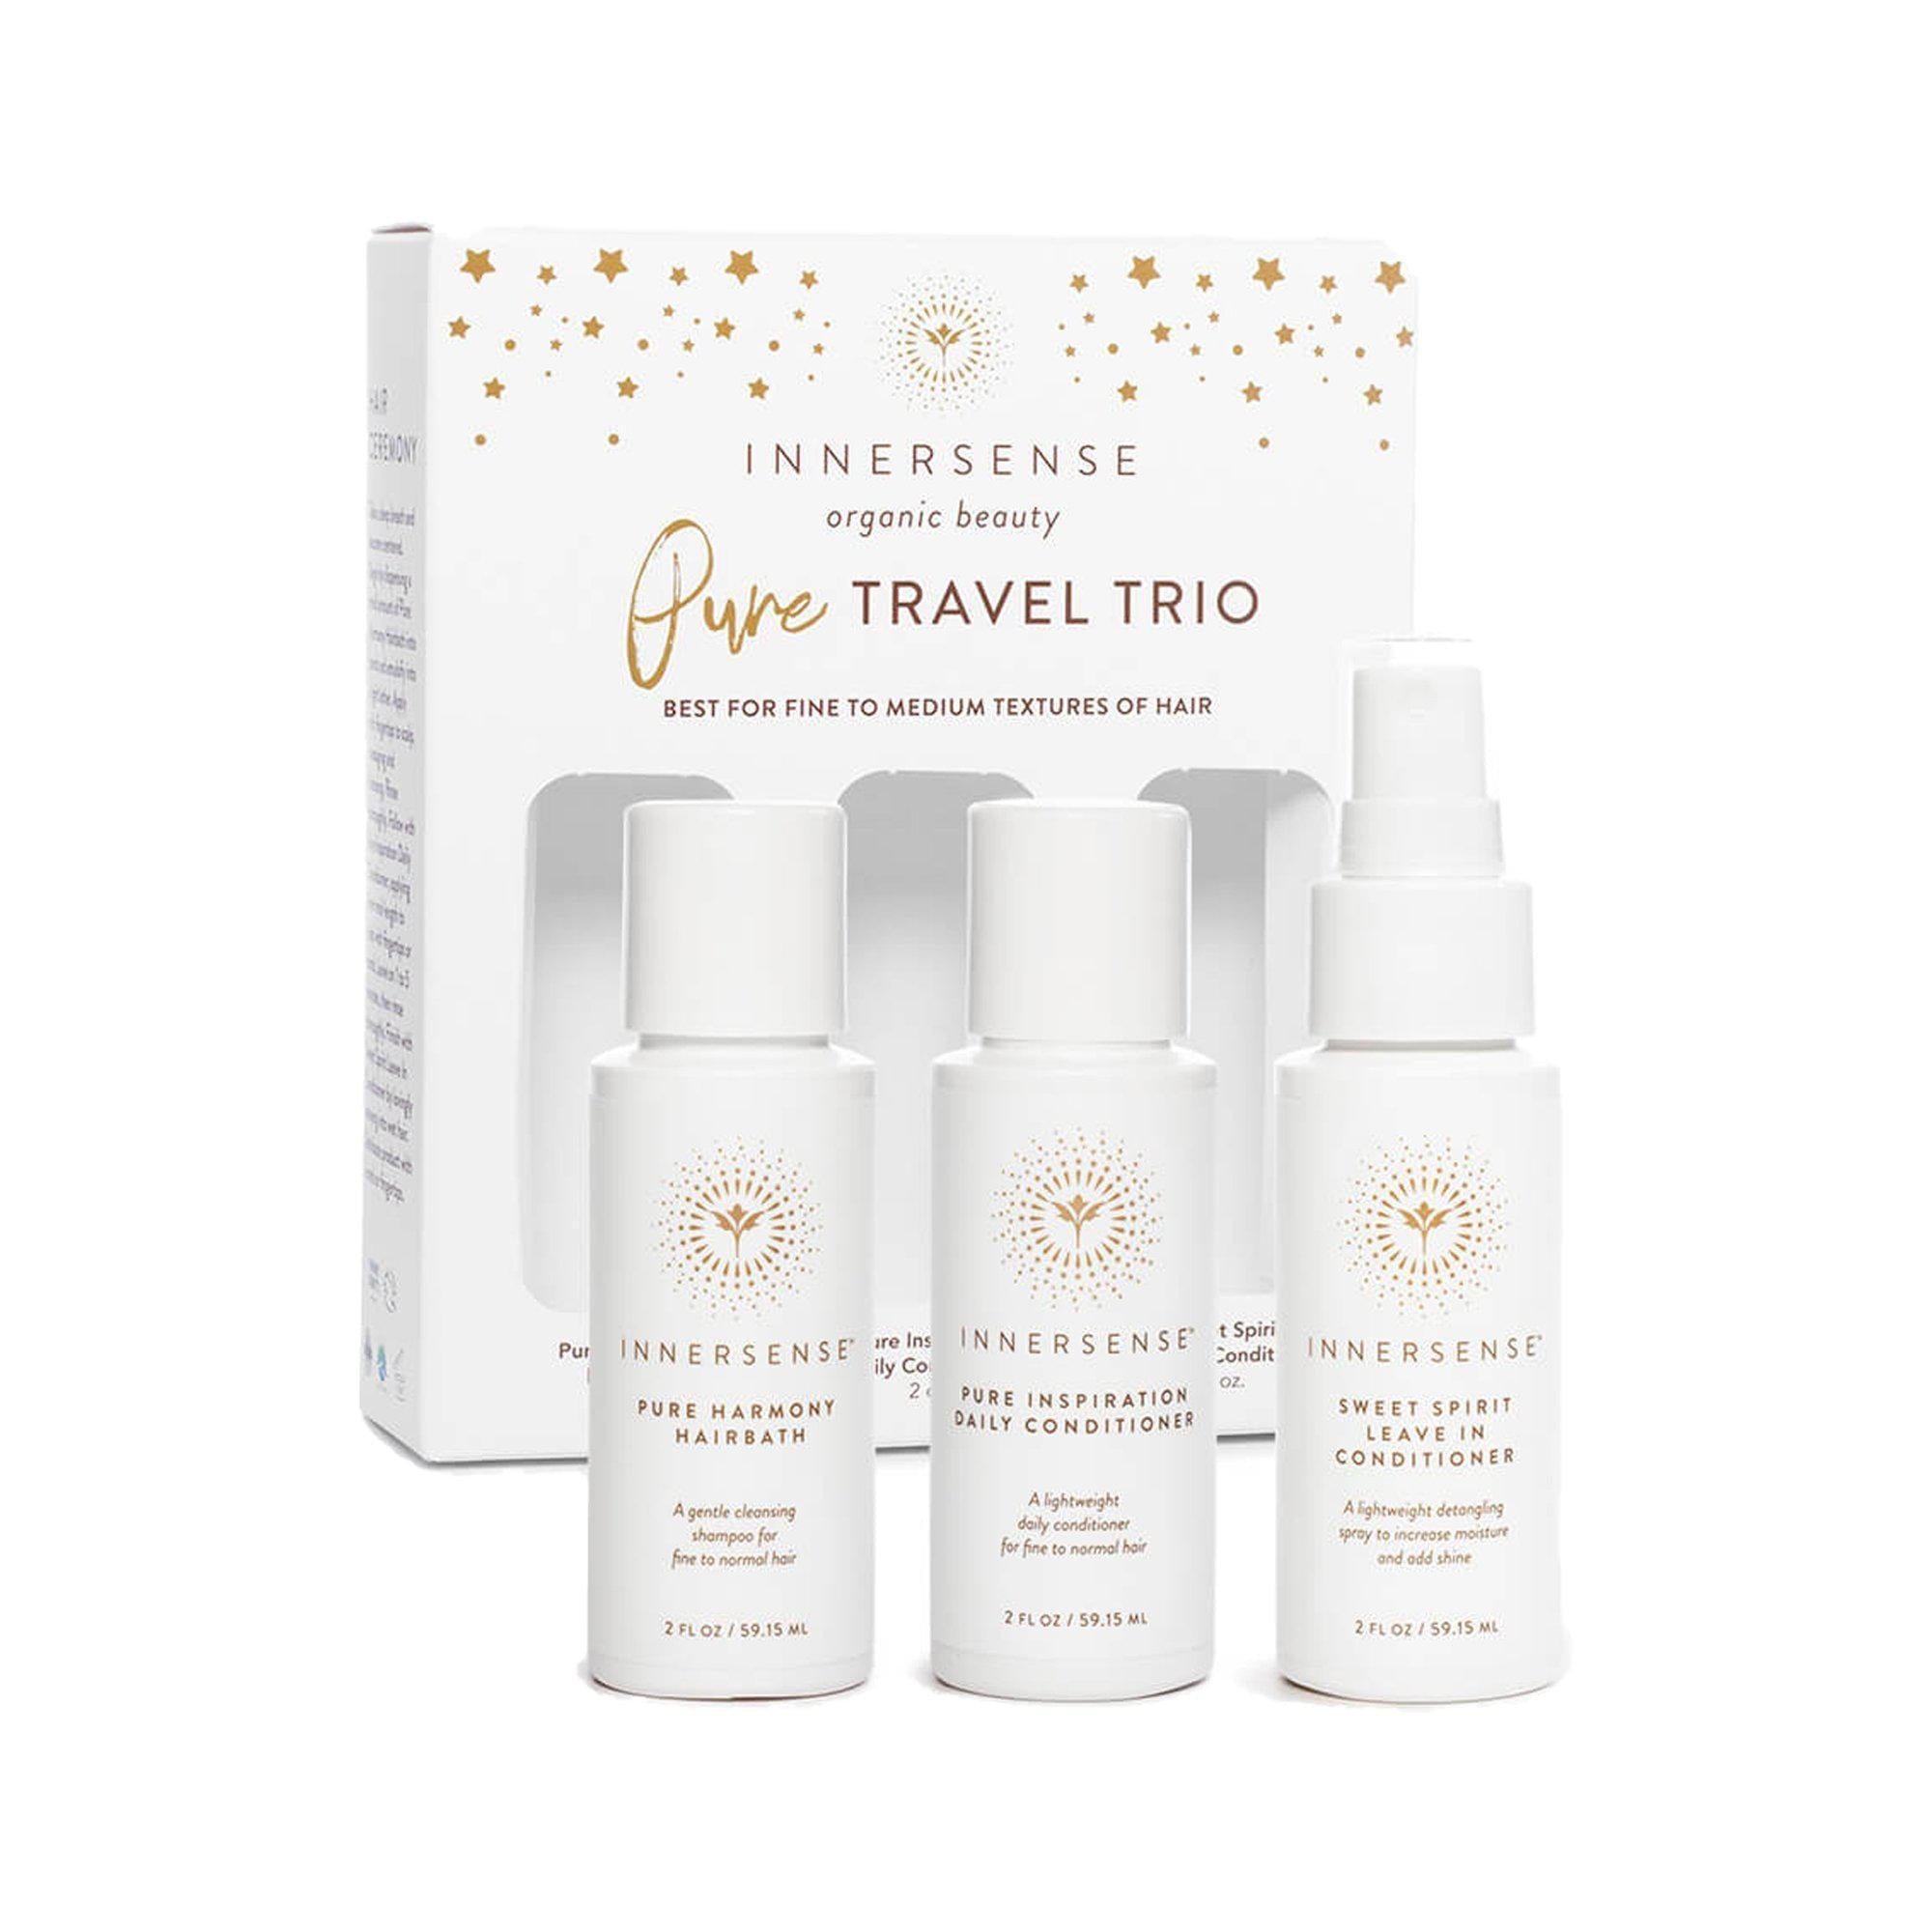 Indisponible - Kit Cheveux Fins Pure Travel Trio Unavailable - Pure Travel Trio Fine Hair Kit - Innersense